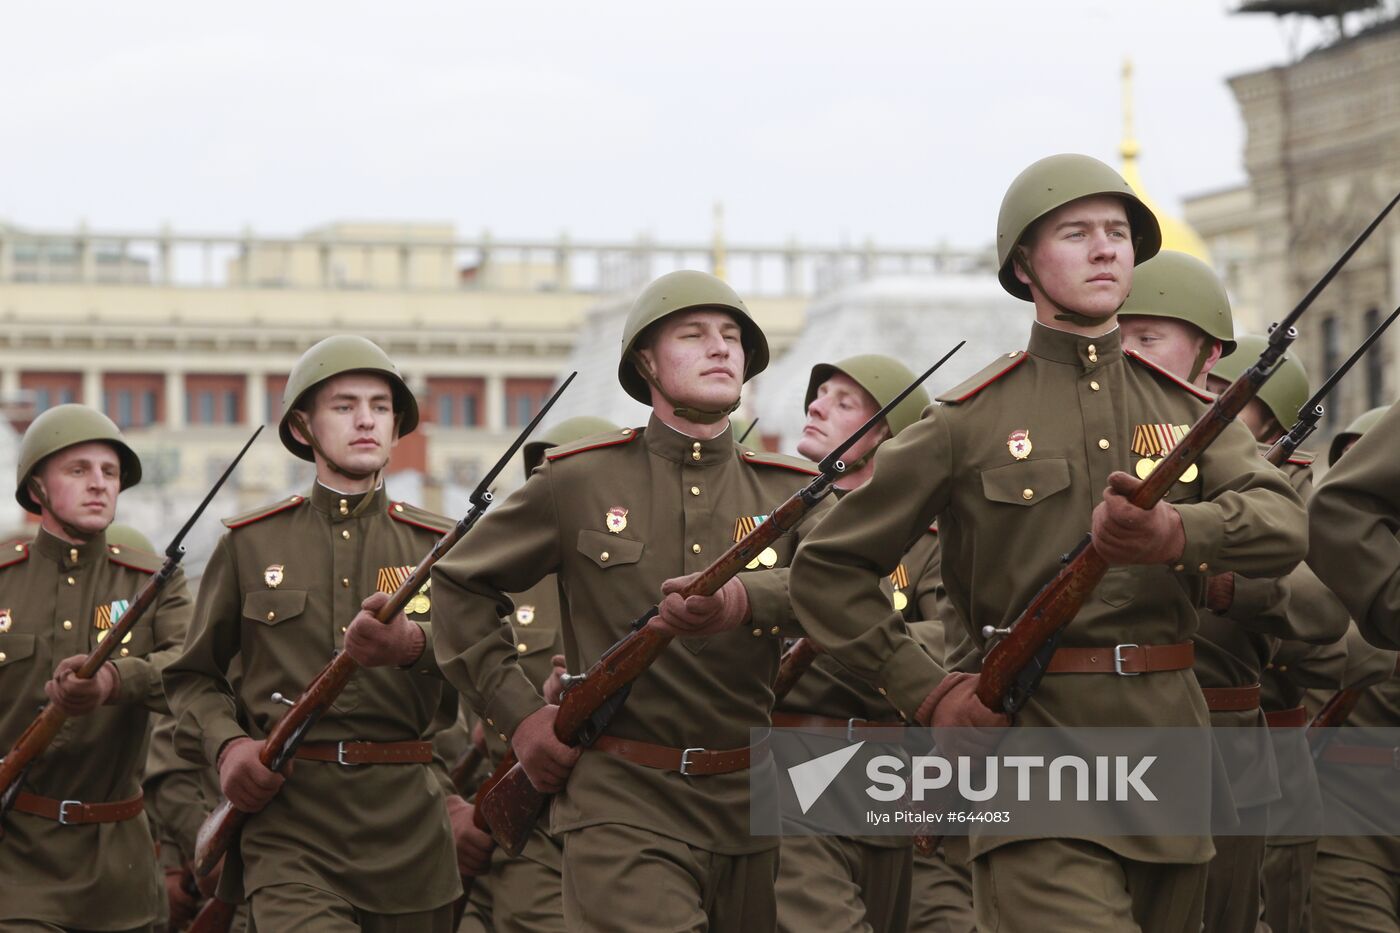 Participants in the dress rehearsal of the Victory Parade